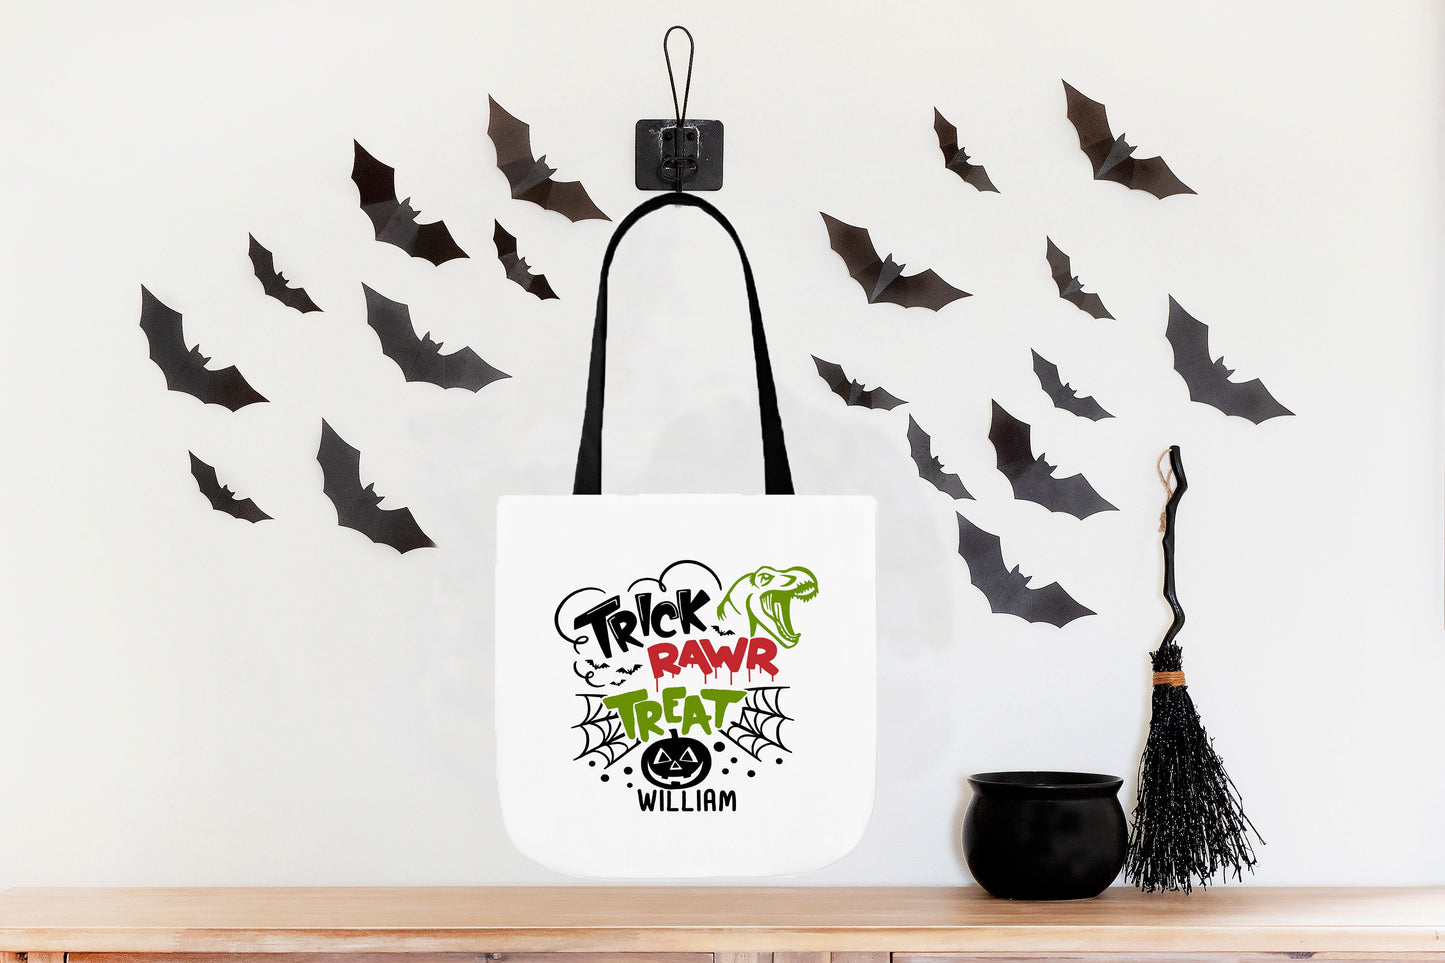 Trick or Treat Bags, Personalized Dinosaur Halloween Bag, Halloween Candy Bags, Halloween Treat Bags for Kids, Halloween Gift, T-rex Gift